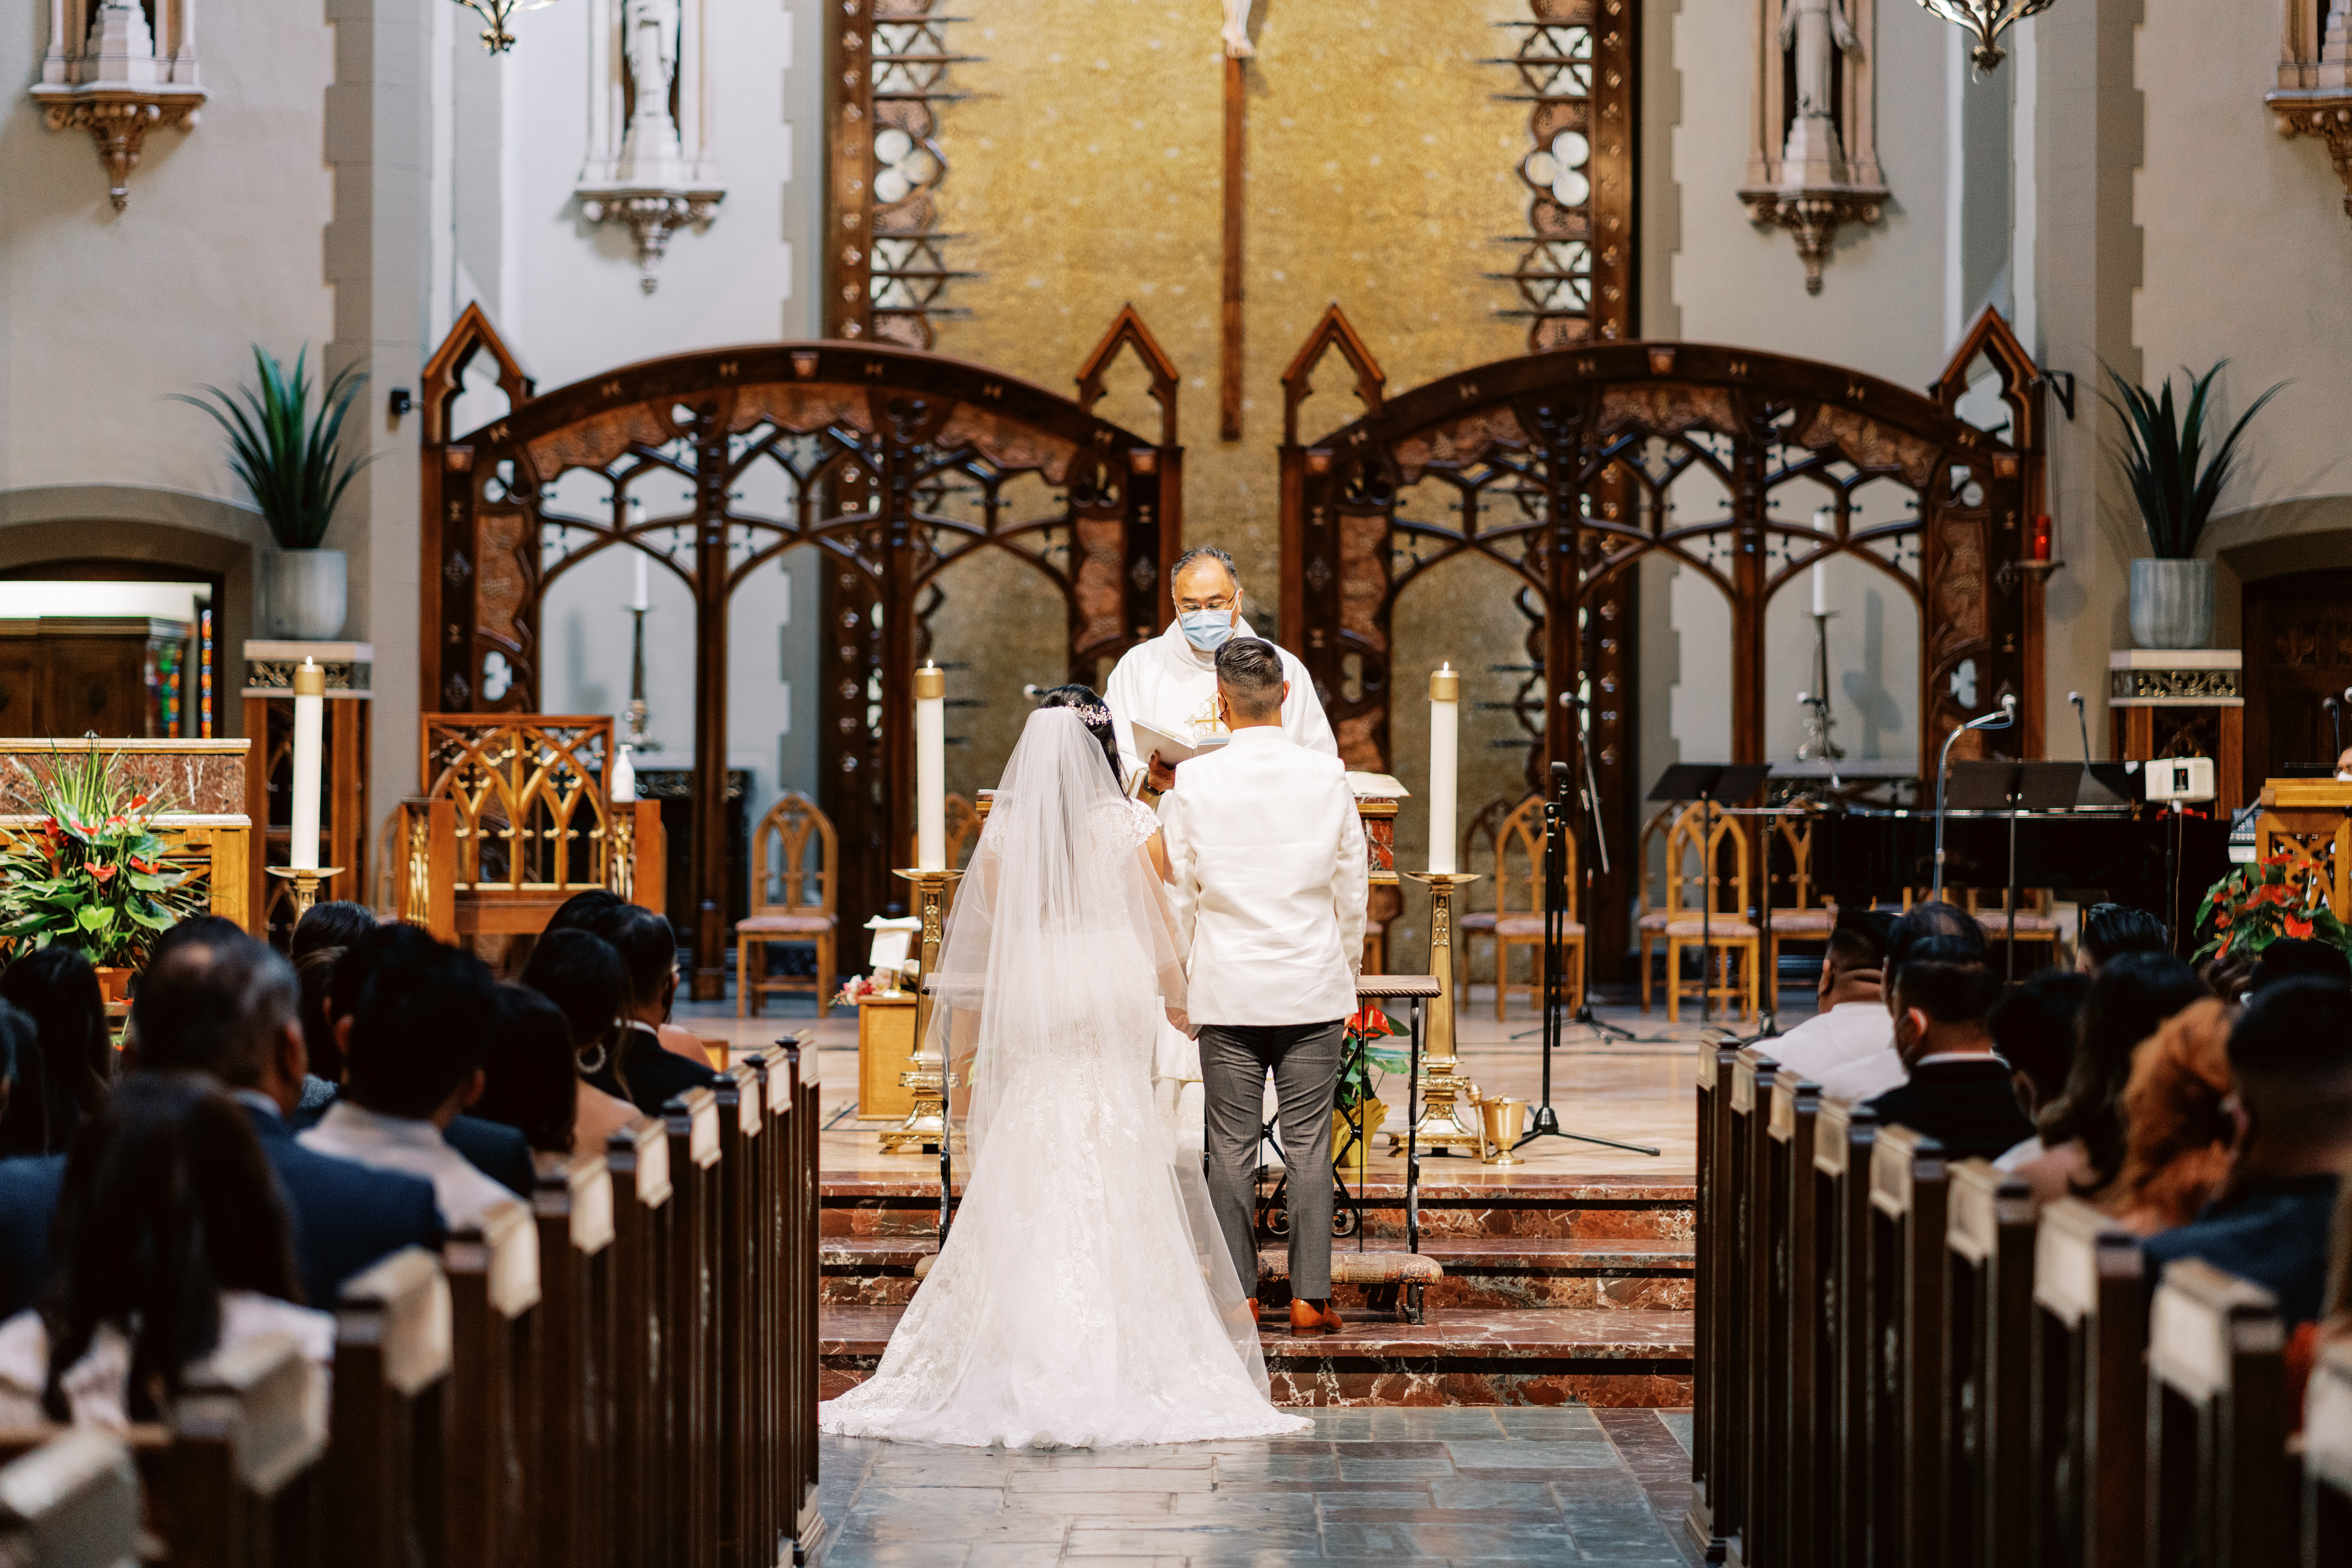 bride and groom stand together at altar during Catholic Church wedding ceremony